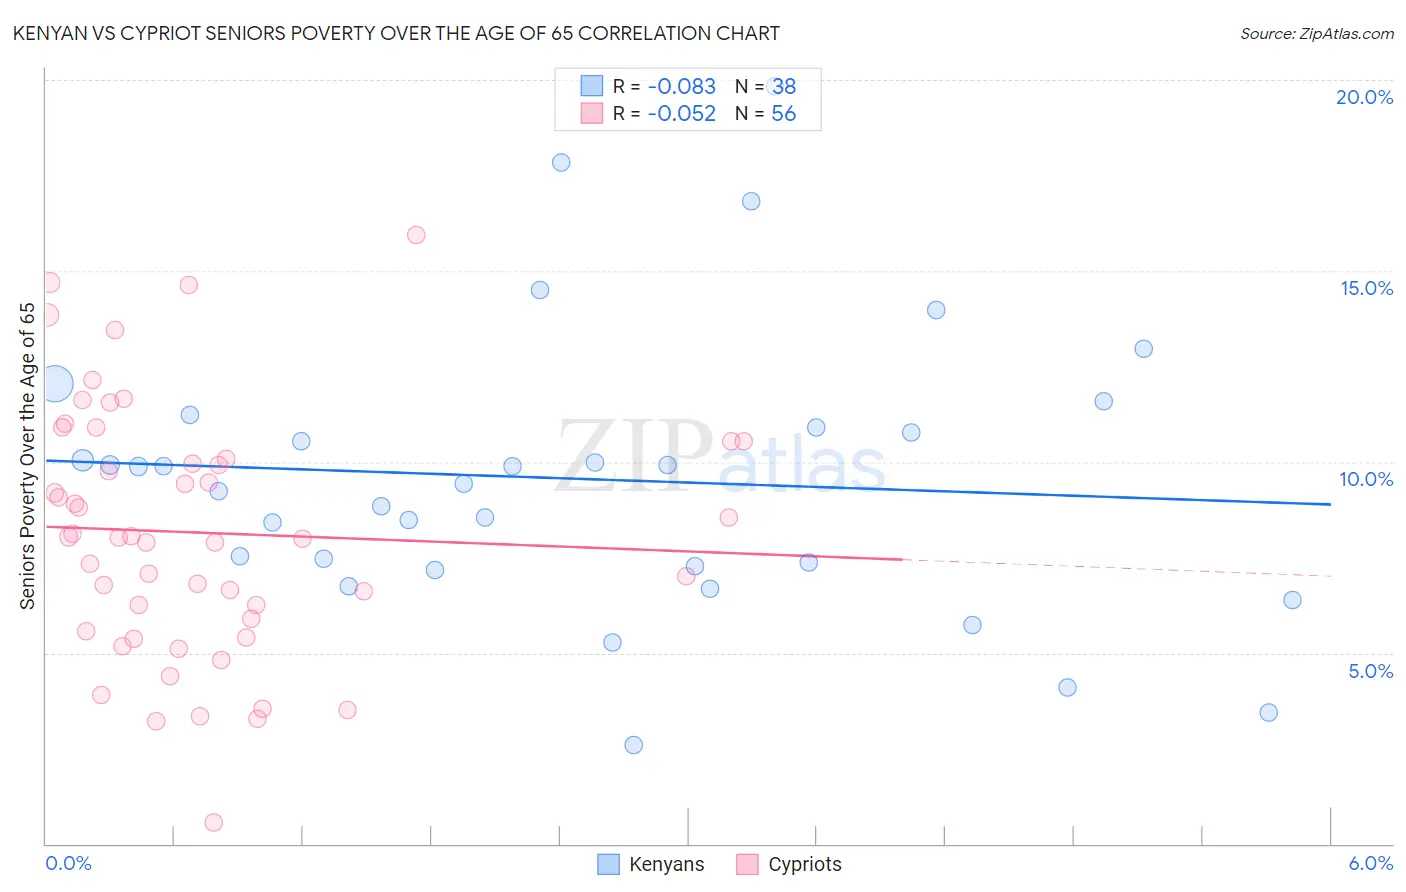 Kenyan vs Cypriot Seniors Poverty Over the Age of 65